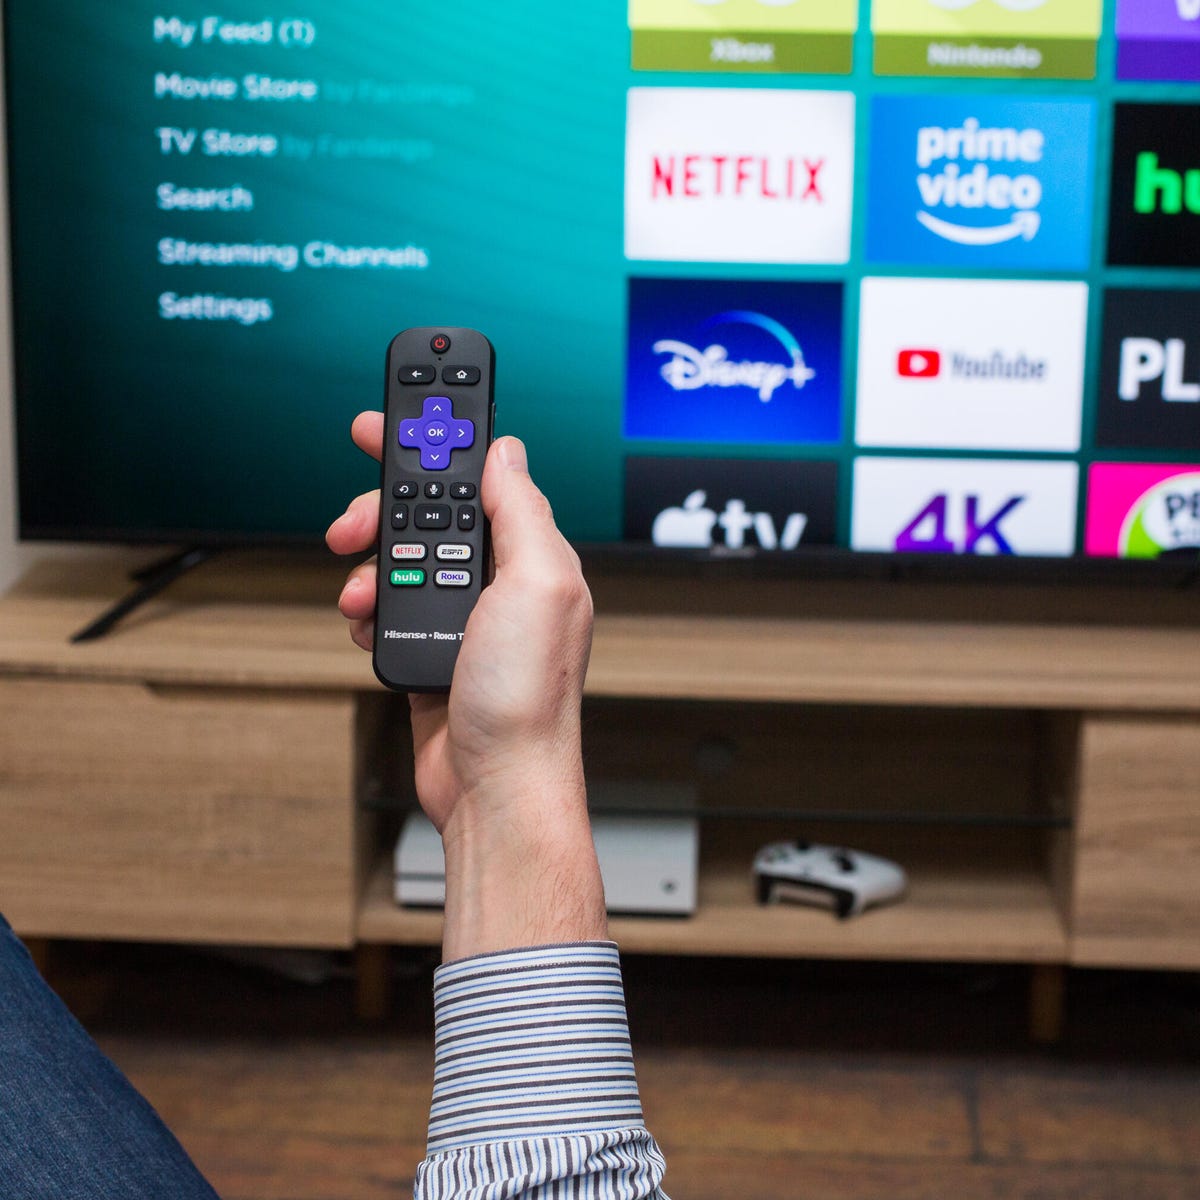 Hisense R8 Roku TV review: Features are nice, appealing price, but no dice  - CNET